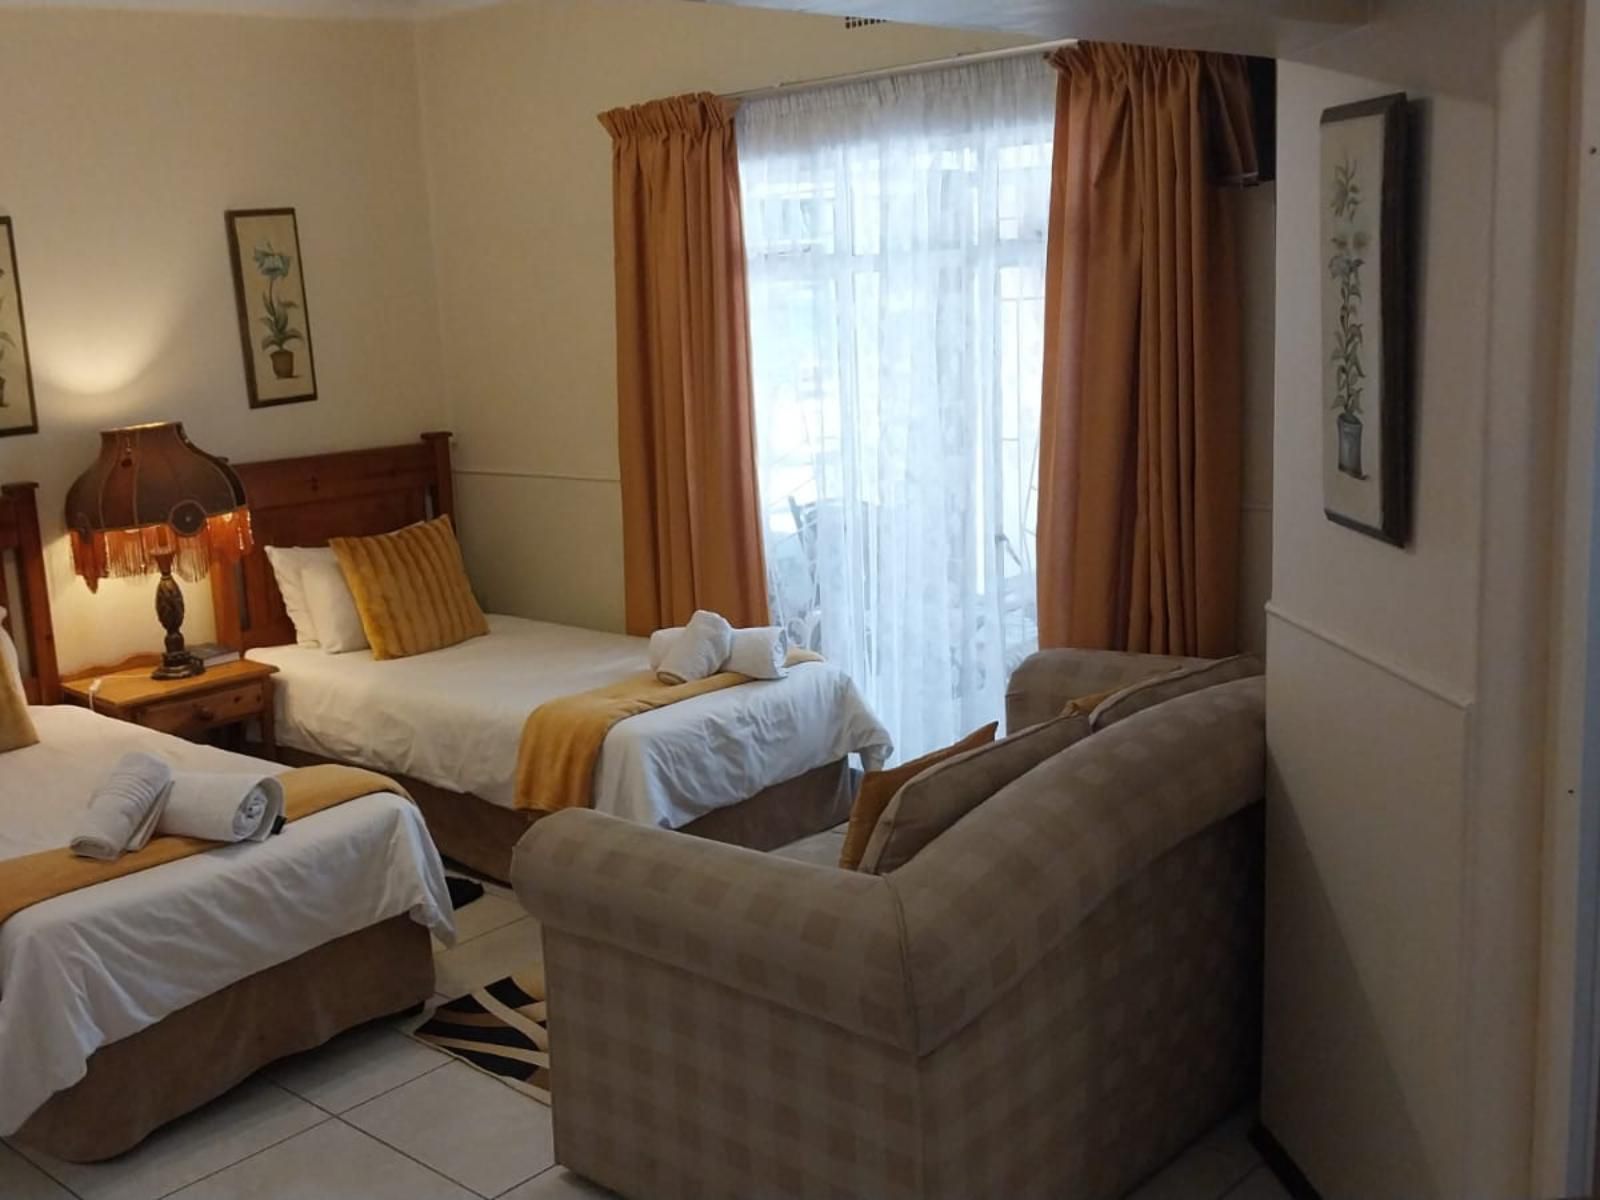 Lily Guesthouse Bayswater Bloemfontein Free State South Africa 